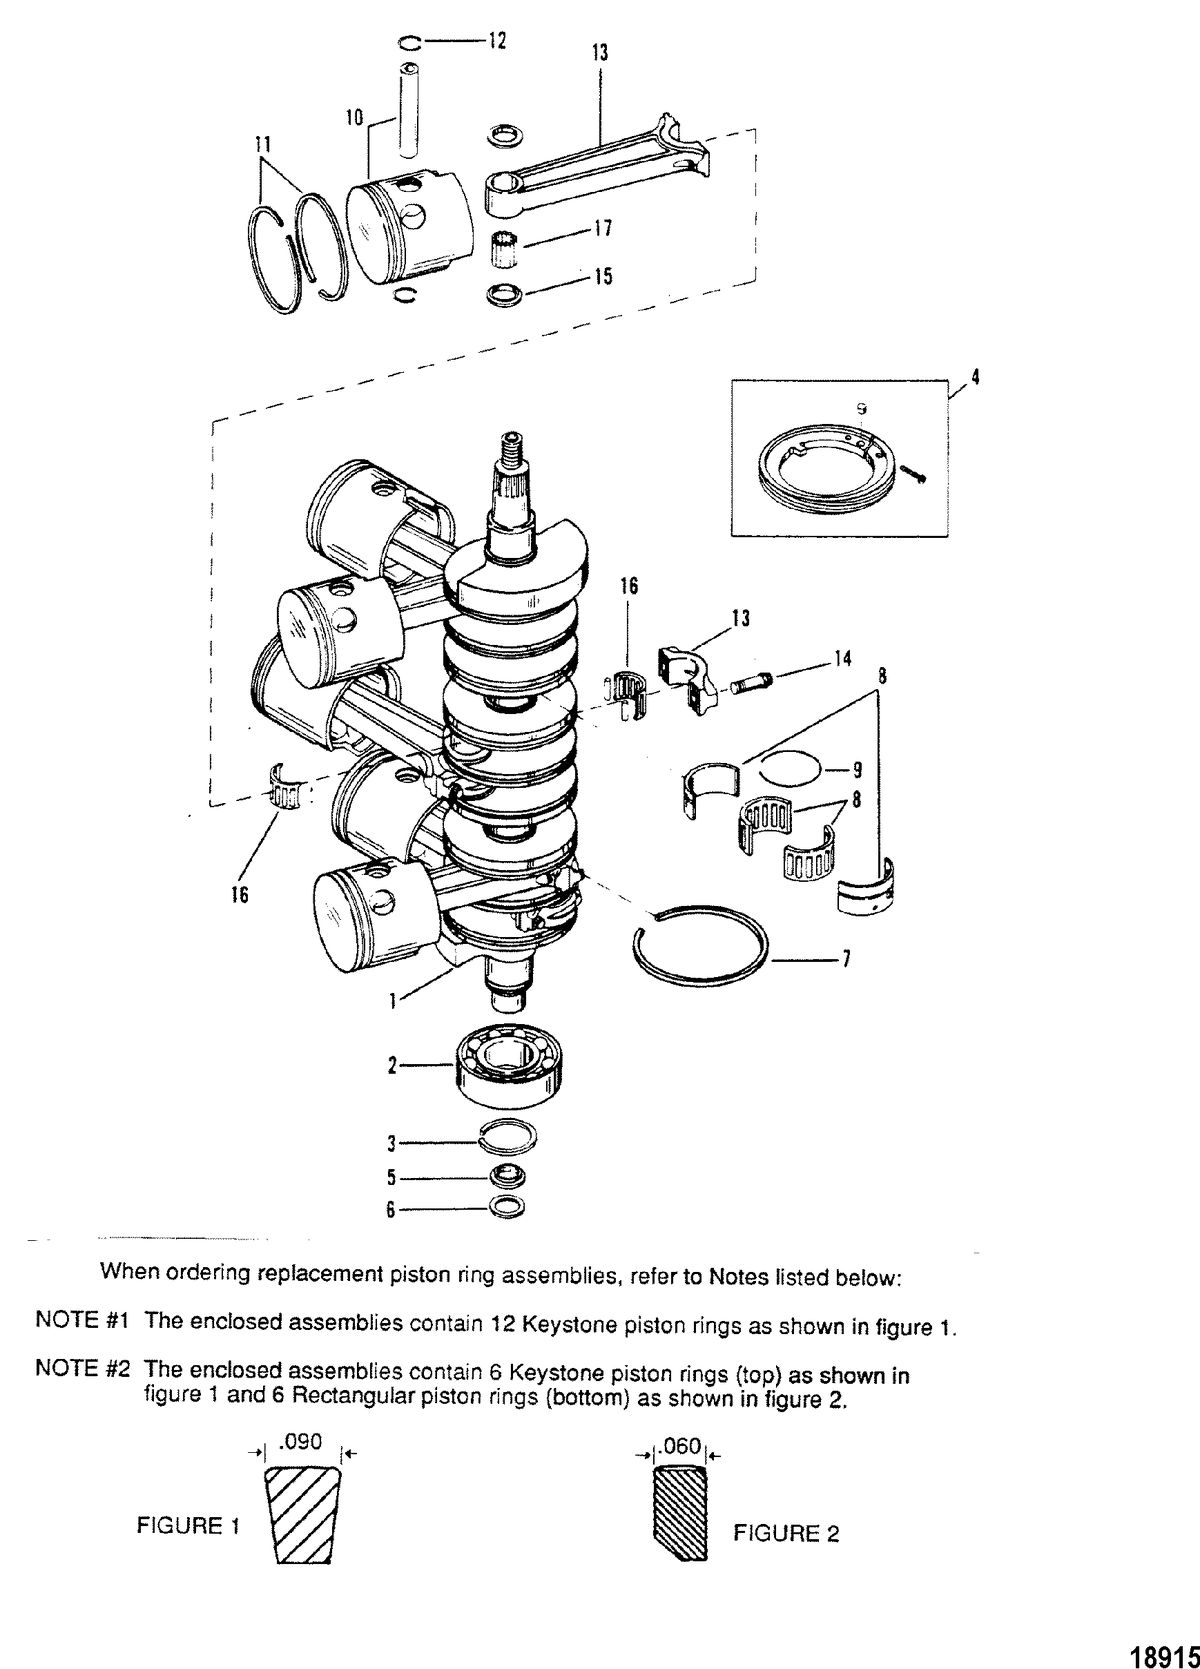 MERCURY/MARINER 175 H.P. V-6 (1976-1988 COMBINED BOOKS) Crankshaft, Pistons and Connecting Rods